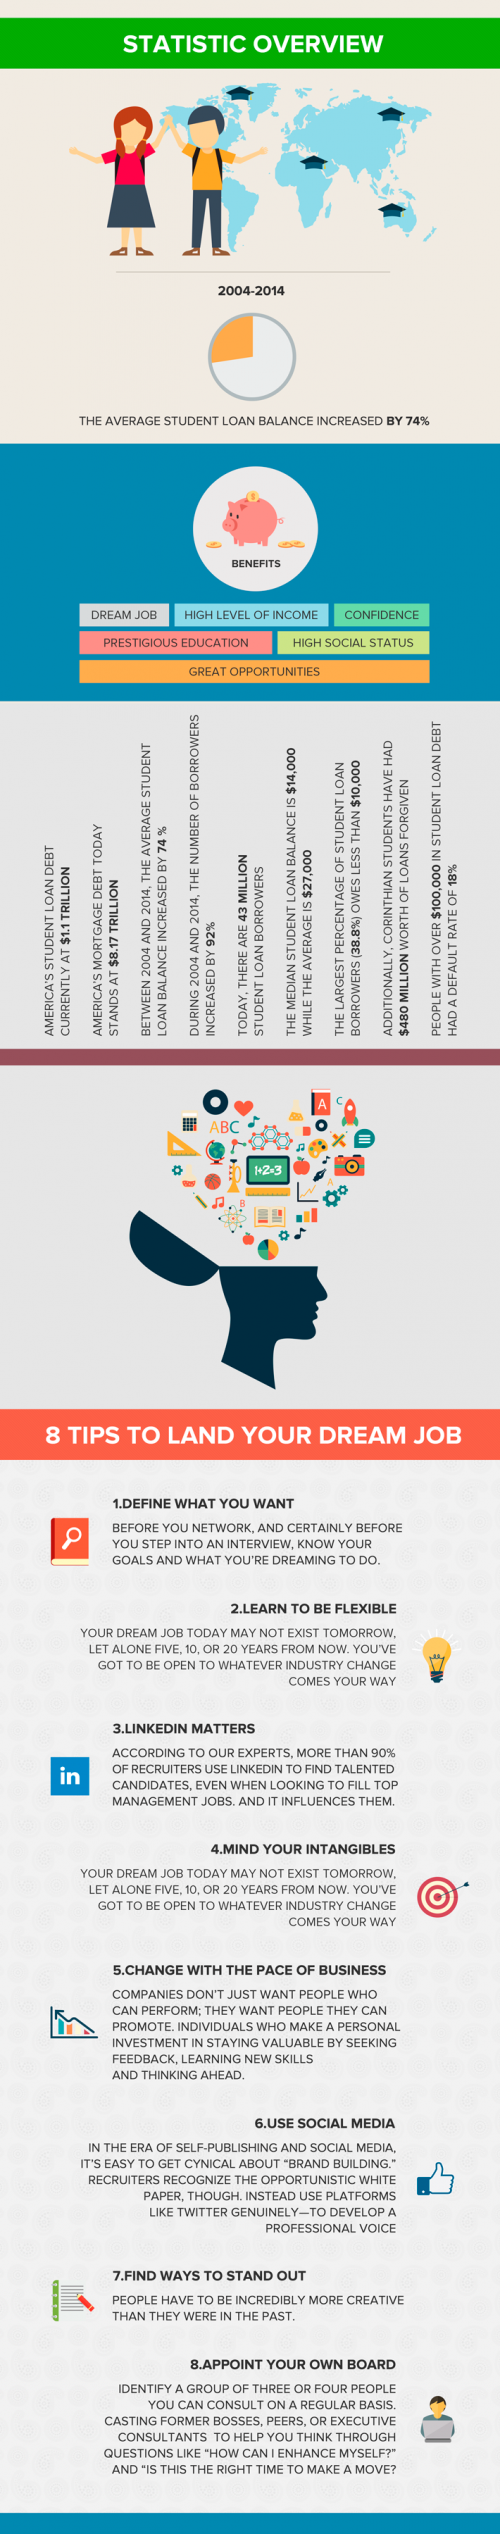 Tips to Land Your Dream Job'